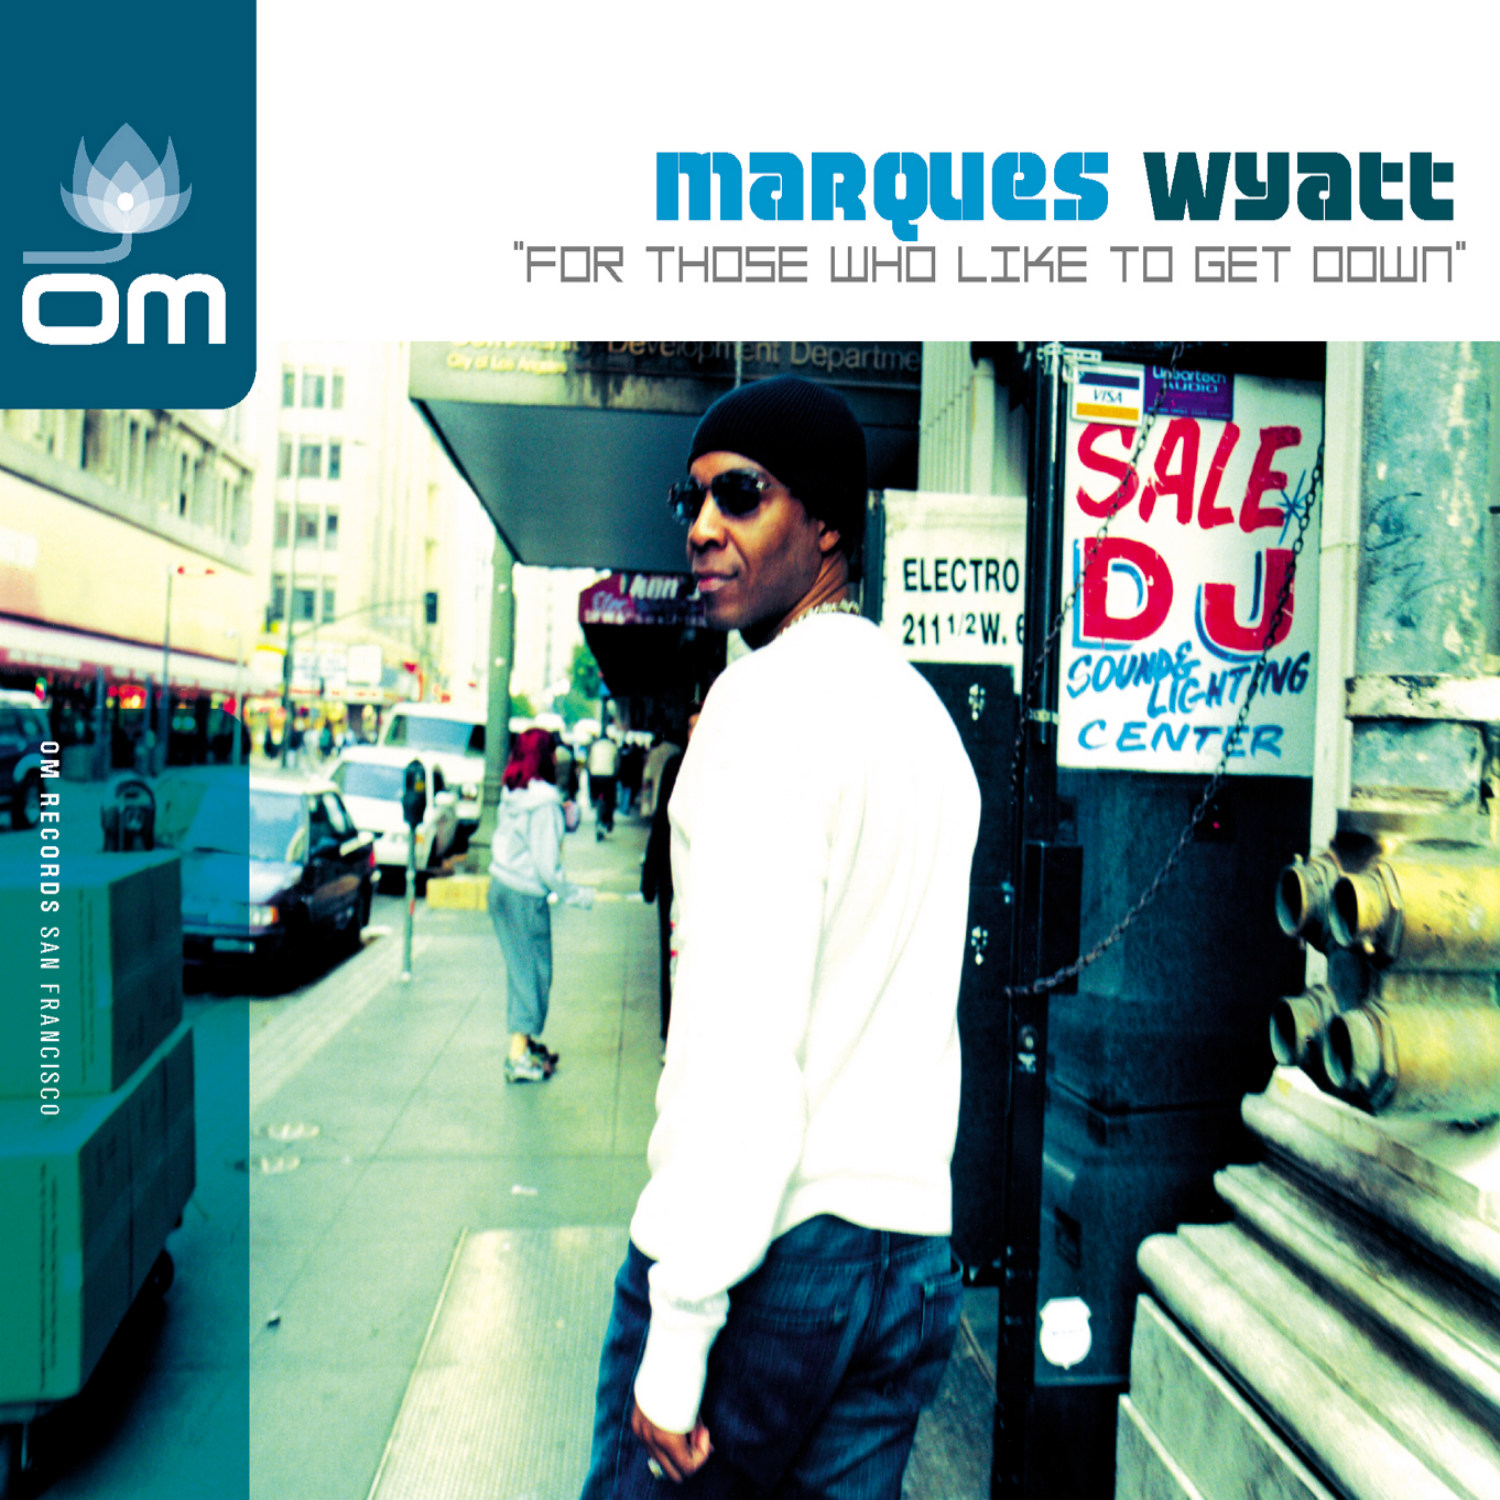 Marques Wyatt - For Those Who Like To Get Down